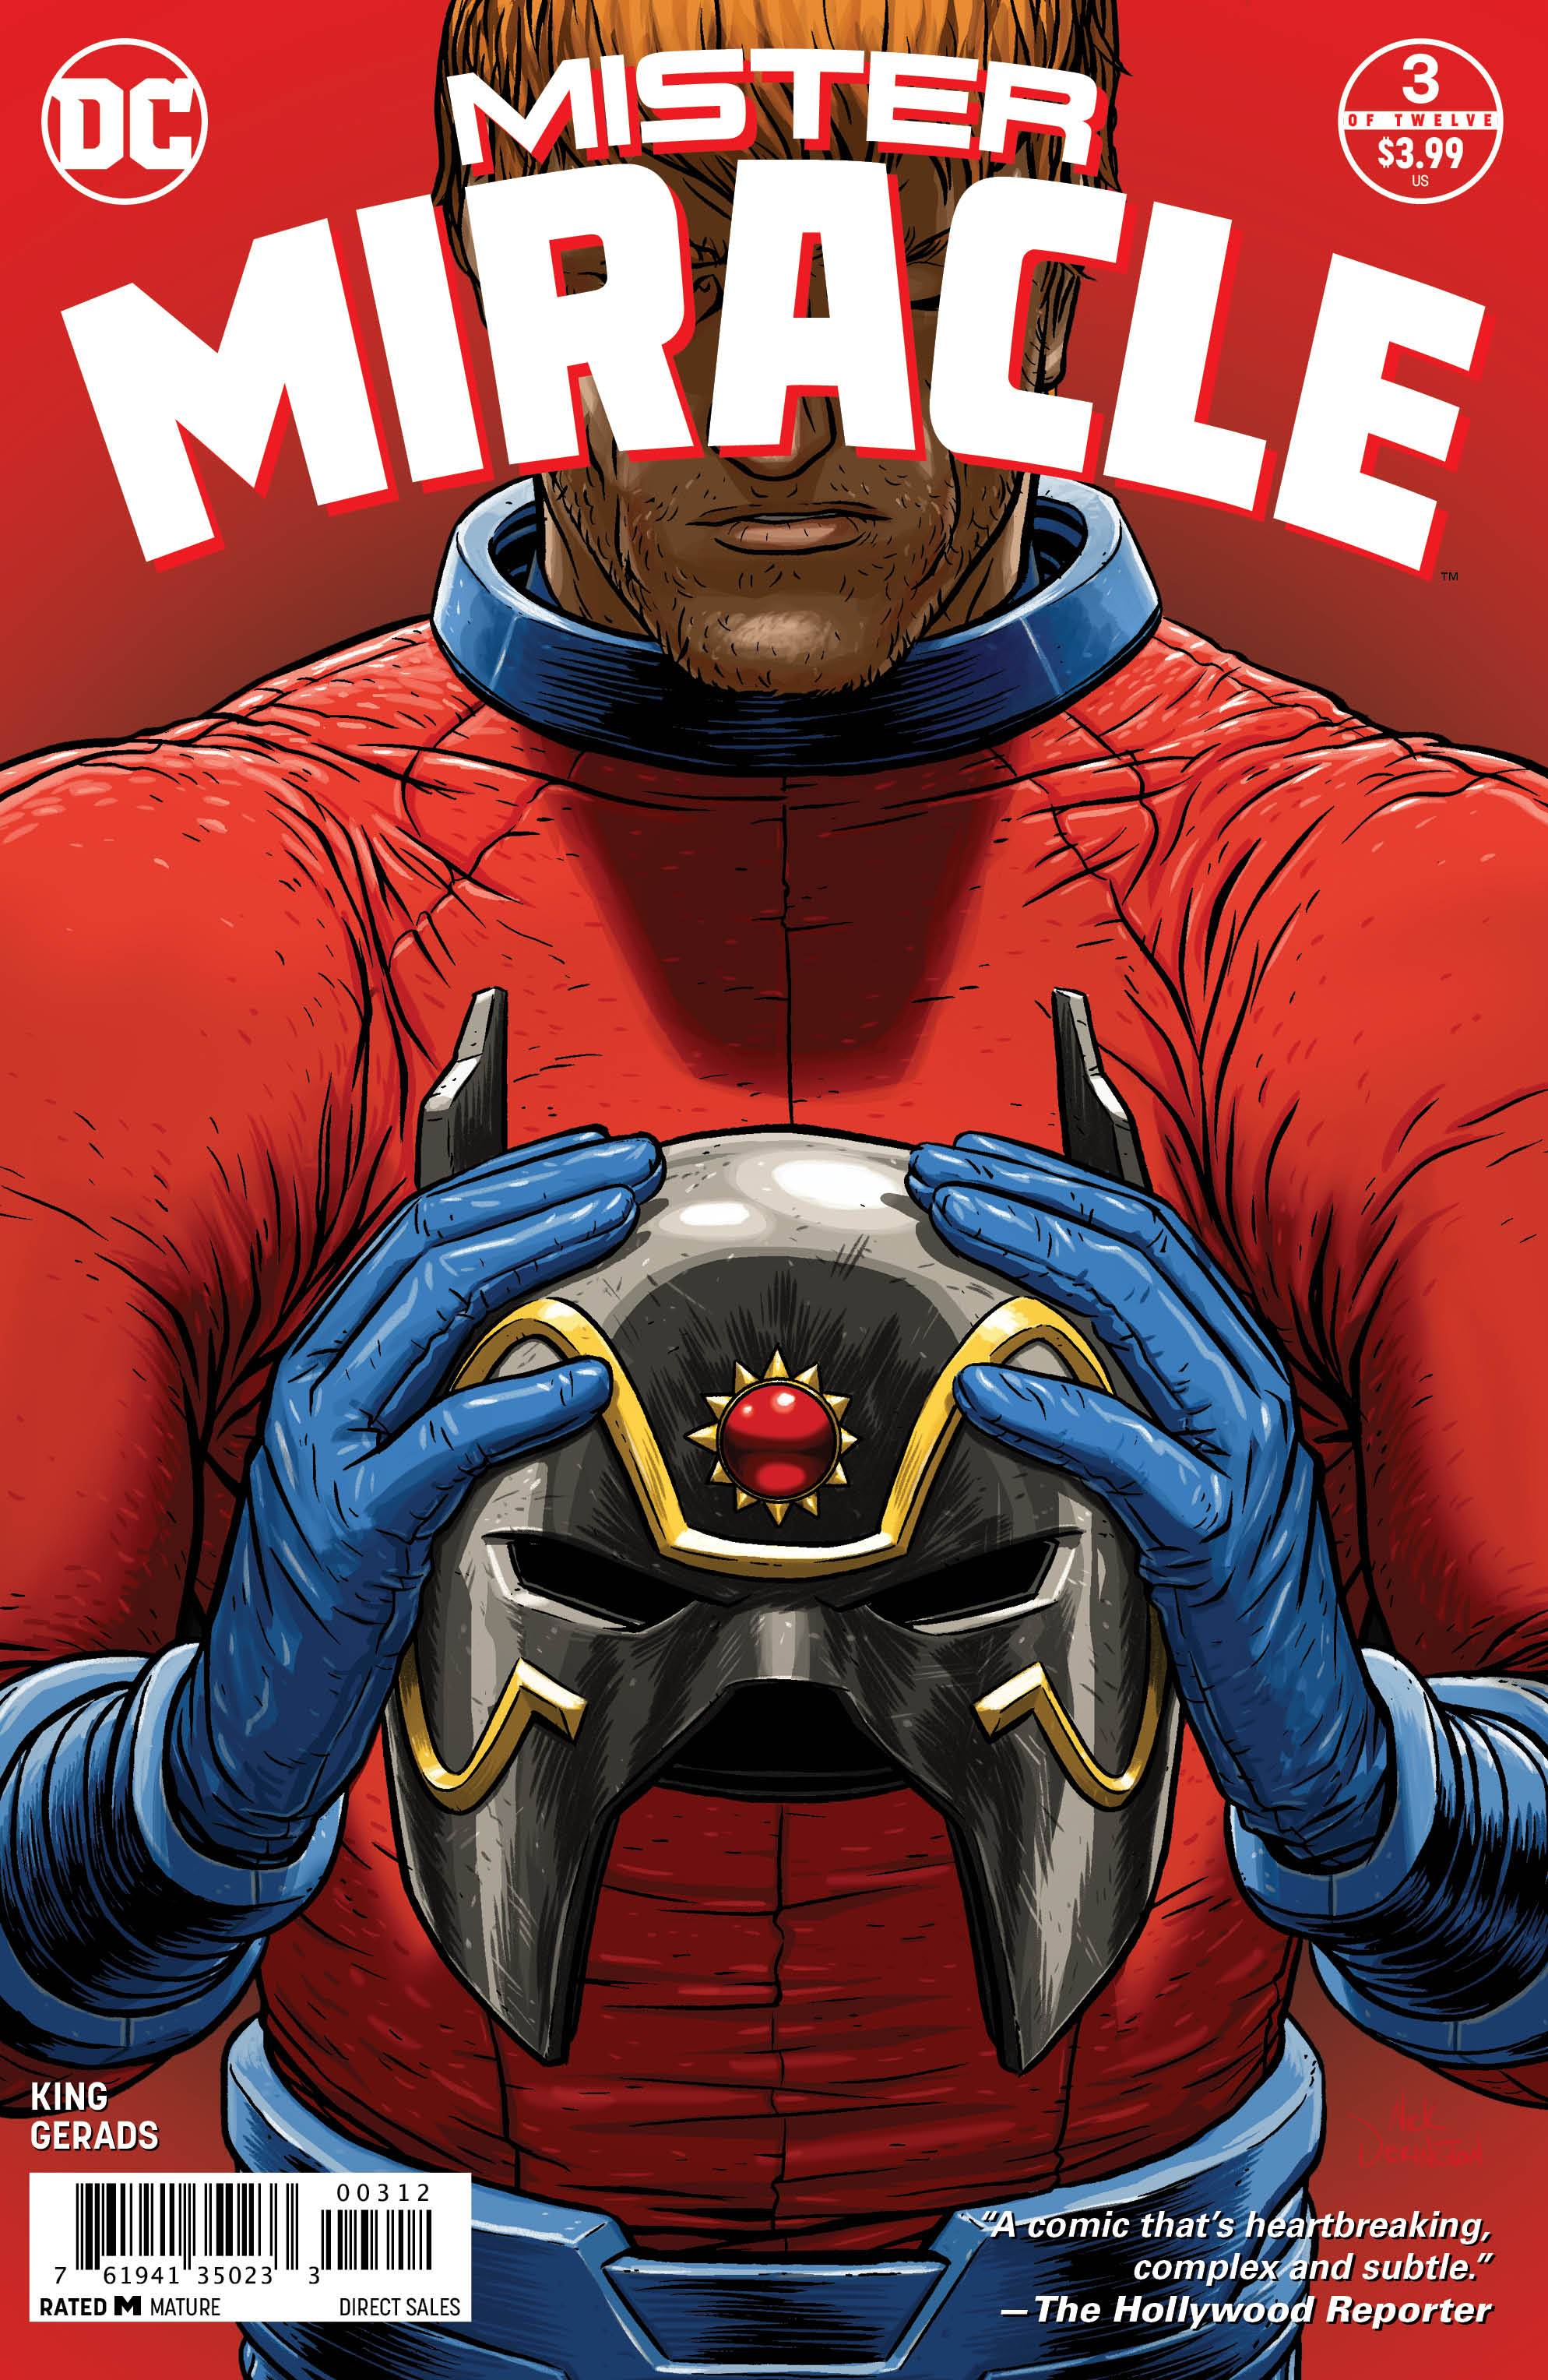 Mister Miracle #3 (Of 12) 2nd Printing (Mature)